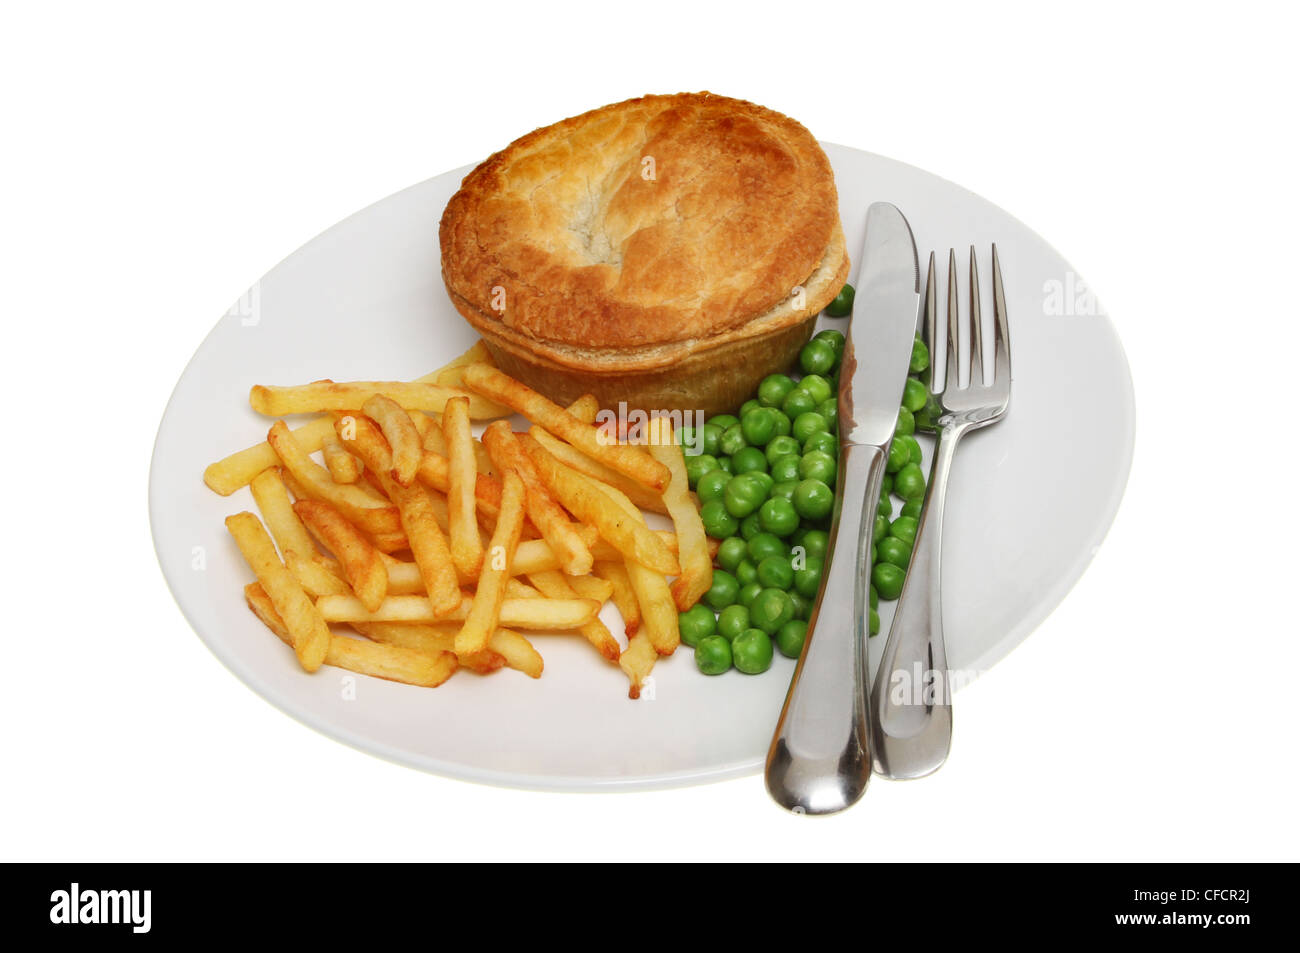 Savory pie potato chips and peas with a knife and fork on a plate isoloated against white Stock Photo